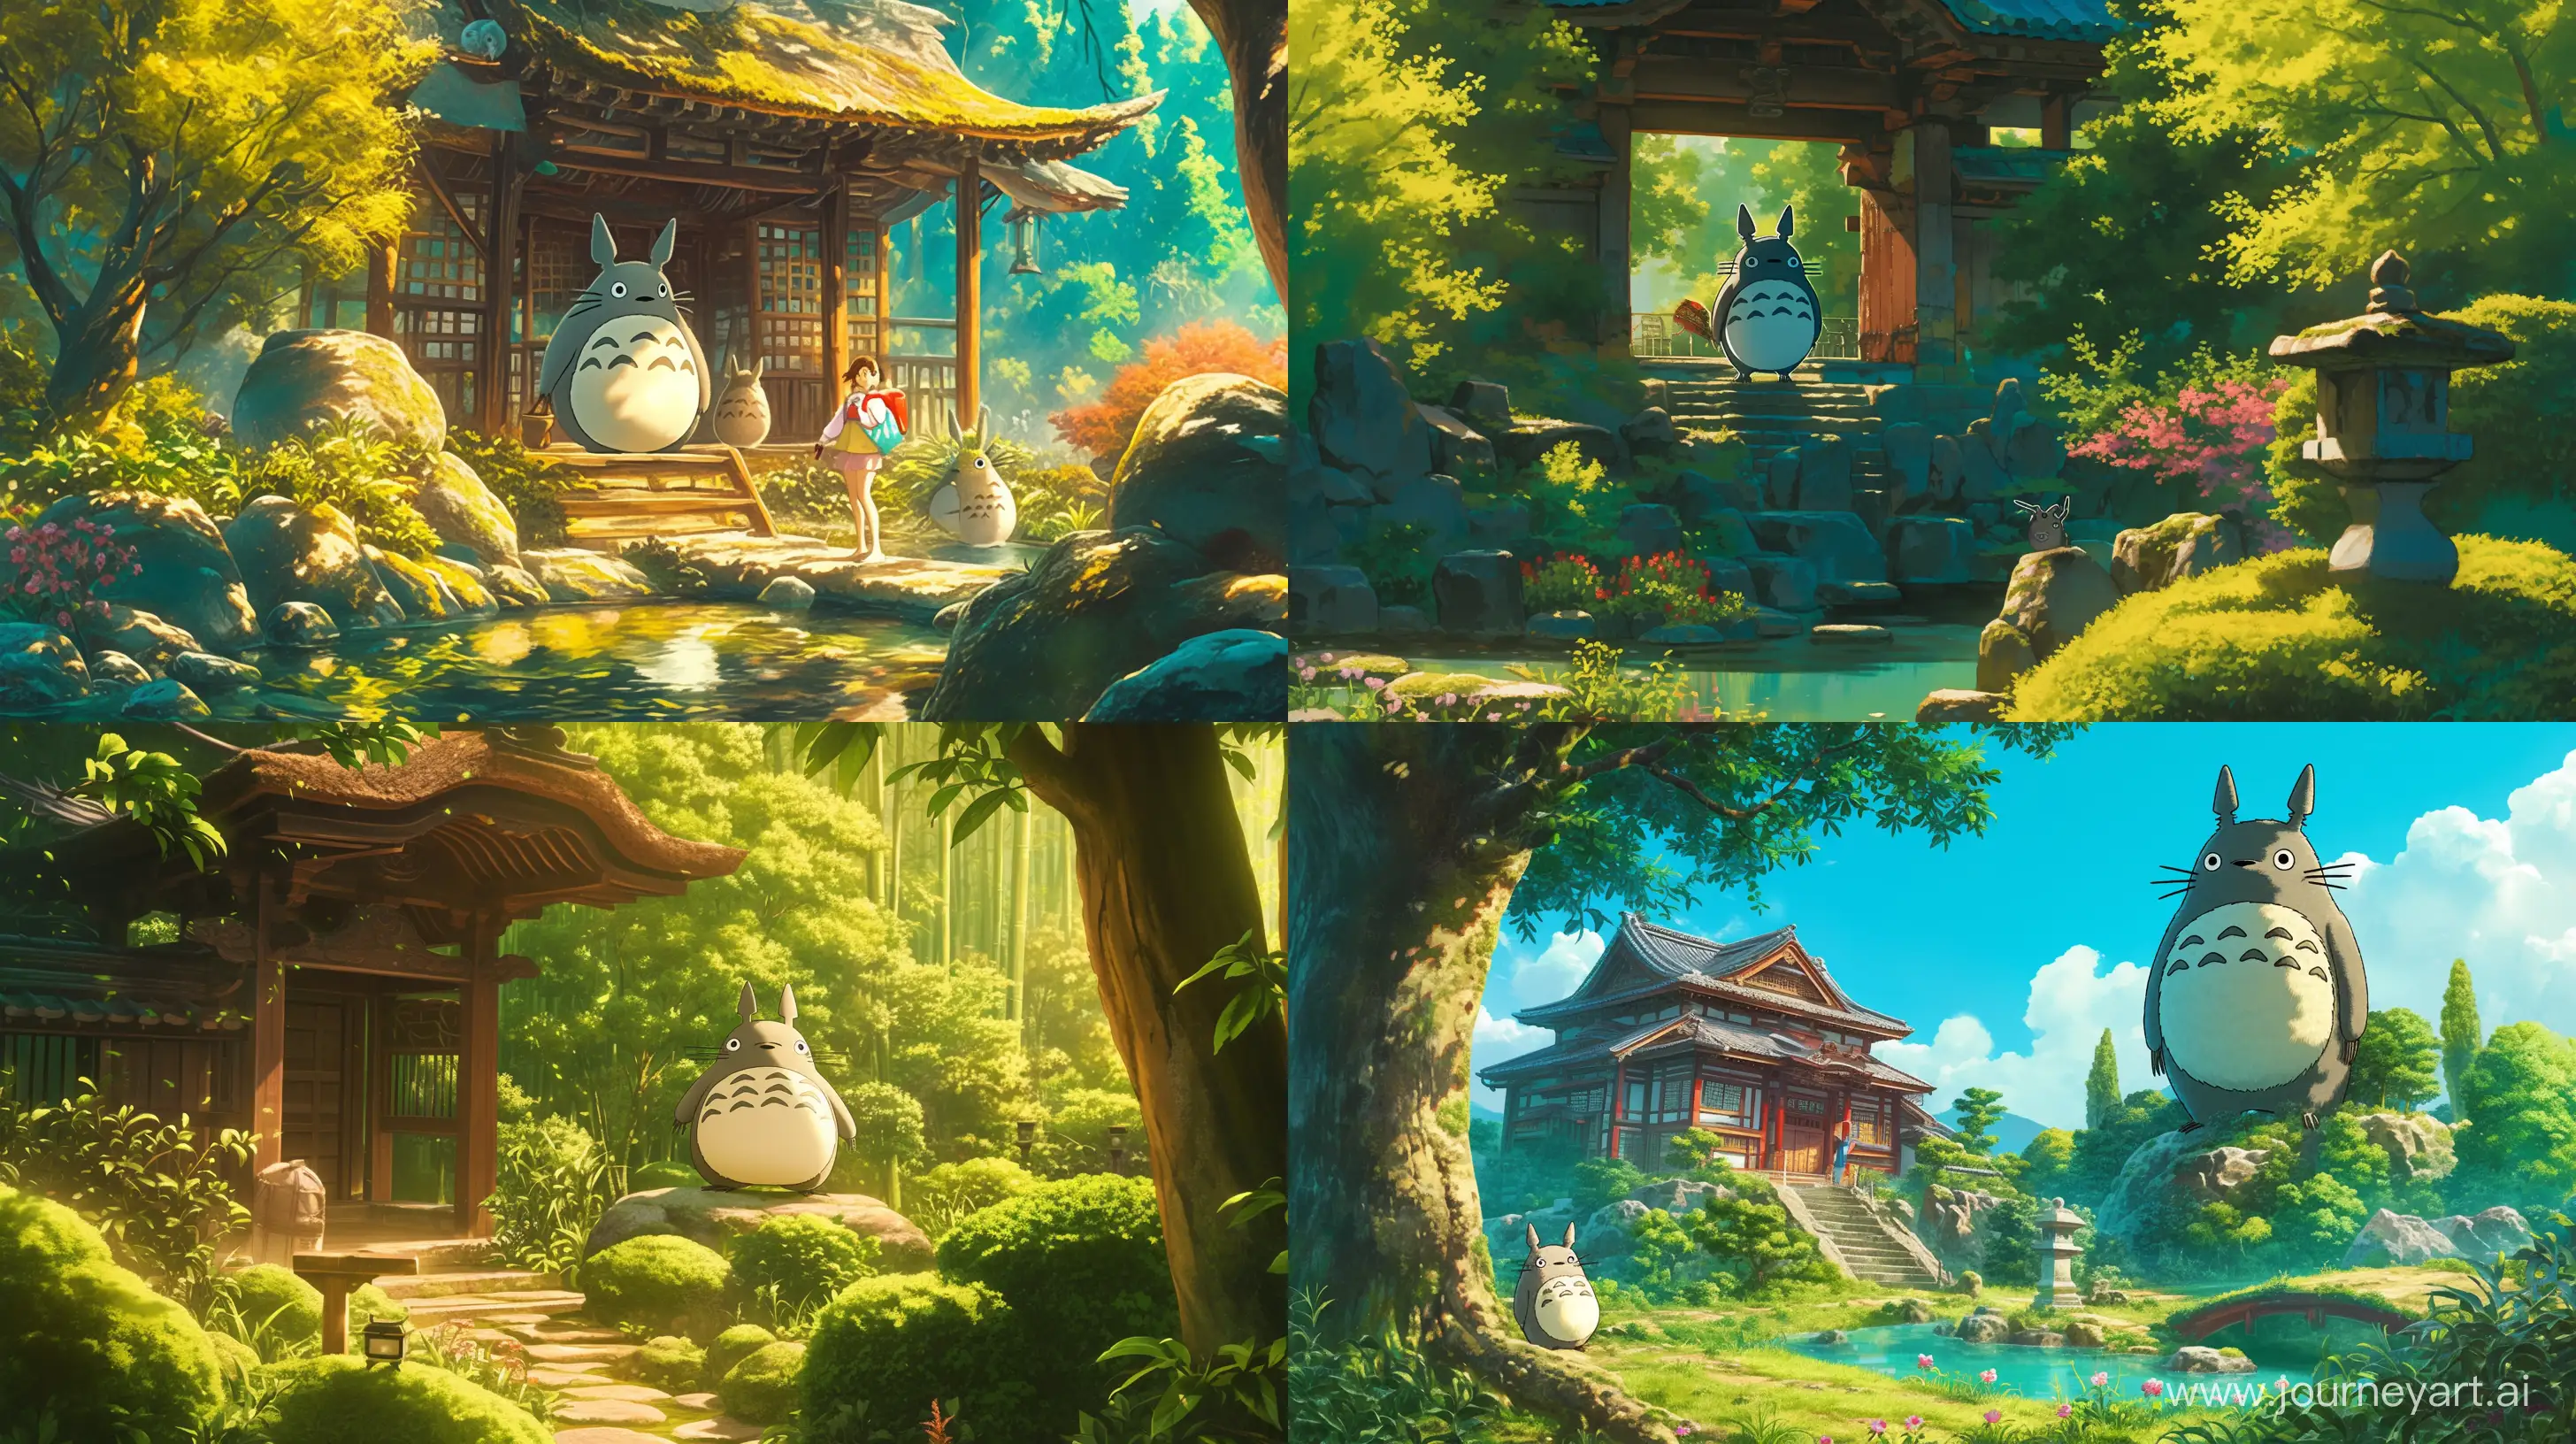 Mystical-Totoro-Leads-Exploration-in-Tranquil-Japanese-Temple-Garden